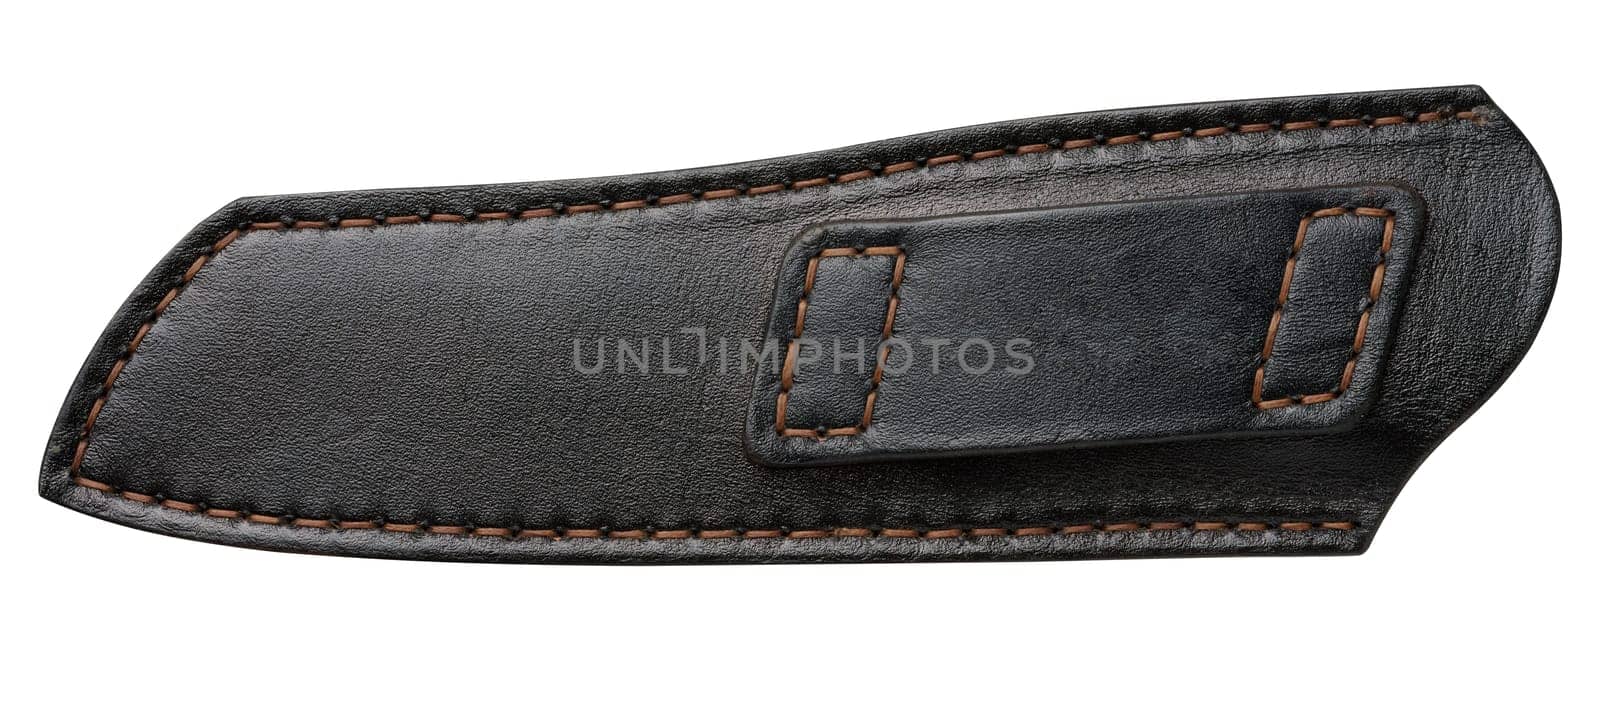 Black leather sheath for a knife on a white isolated background by ndanko